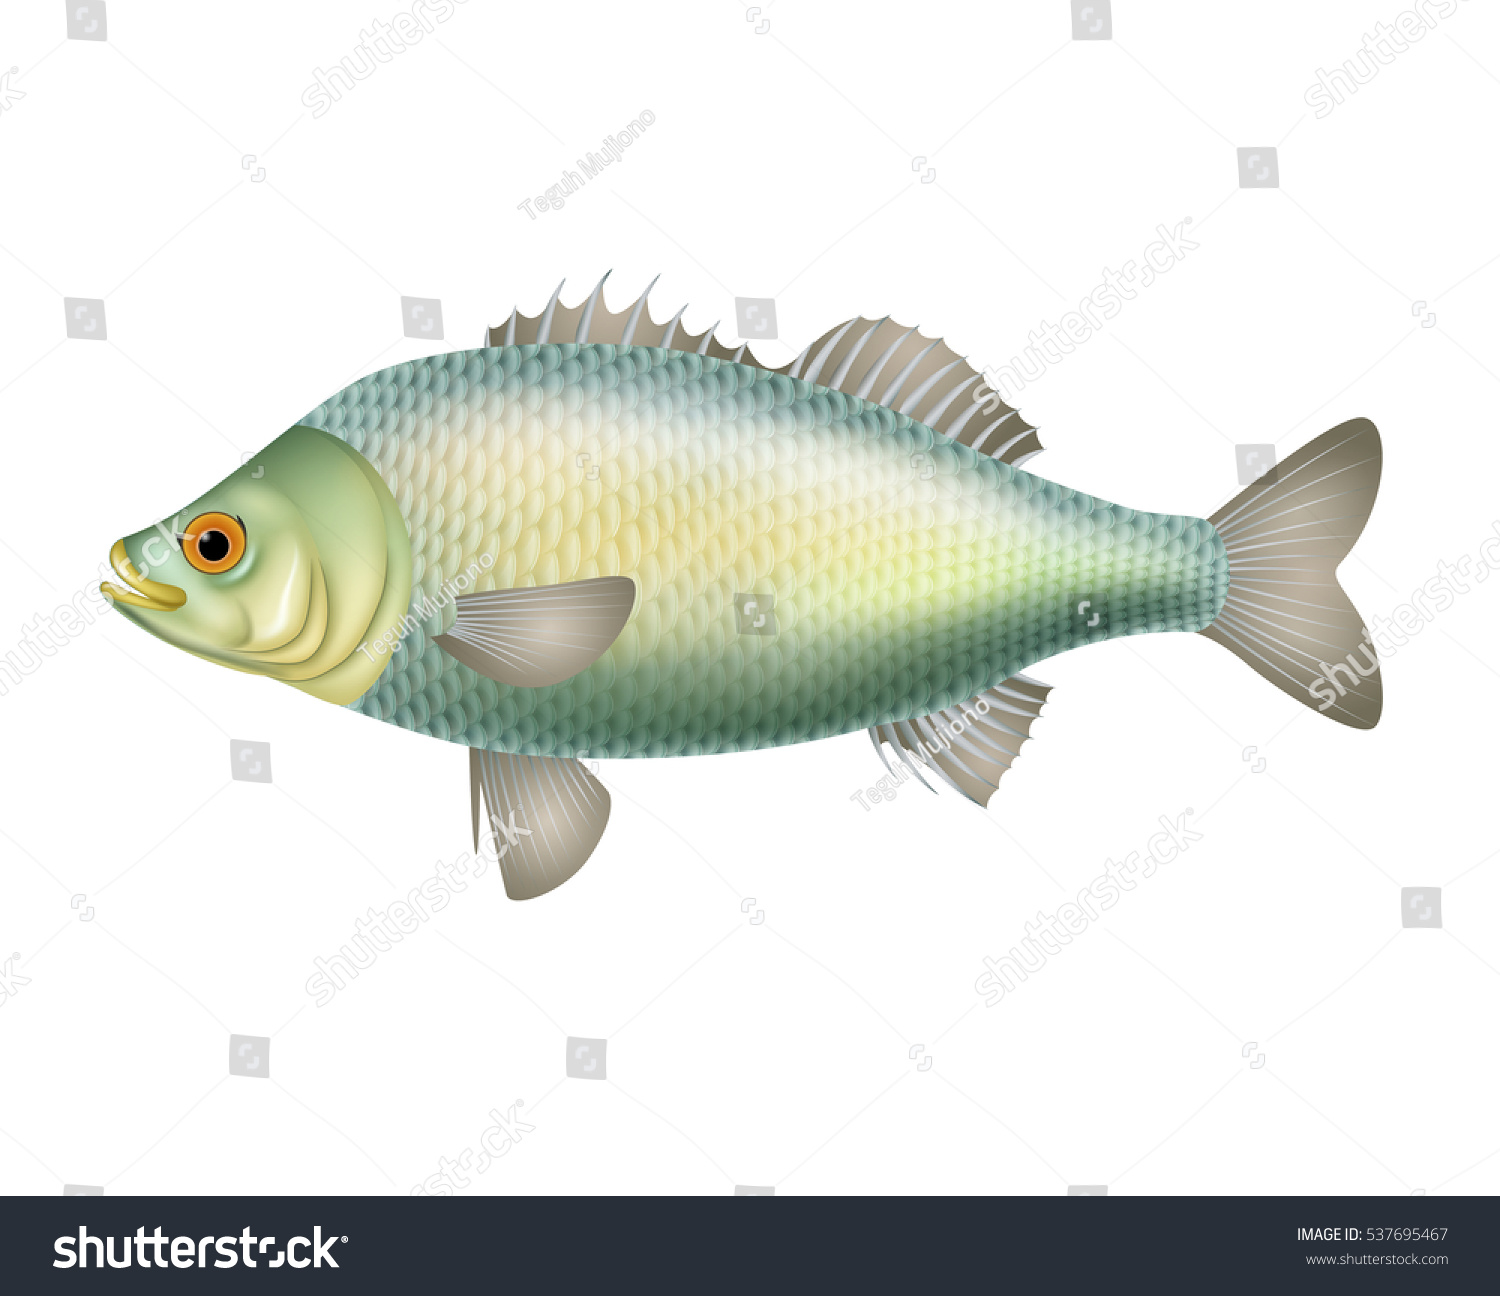 Illustration Fish Isolated On White Background Stock Vector 537695467